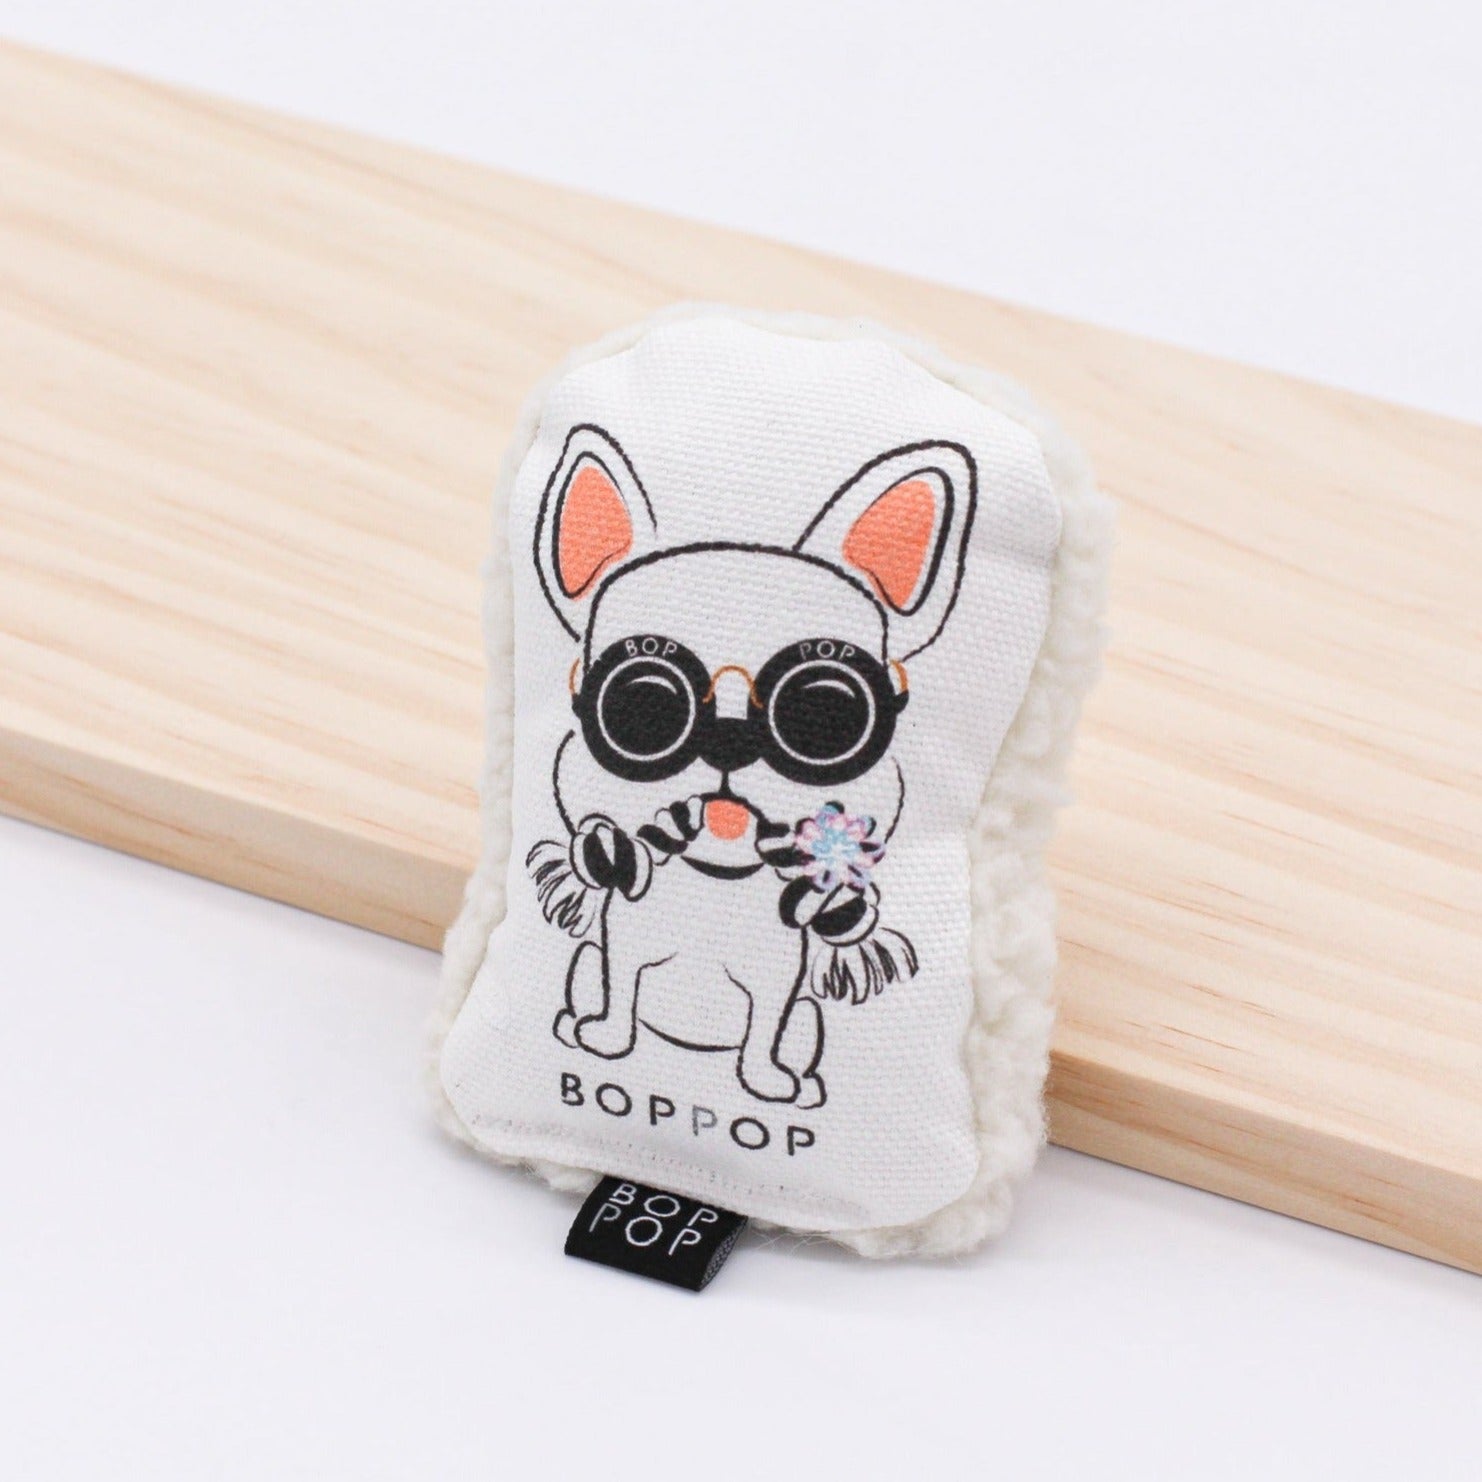 French Bulldog Dog Toy squeaker crinkle Organic Cotton Canvas Sherpa